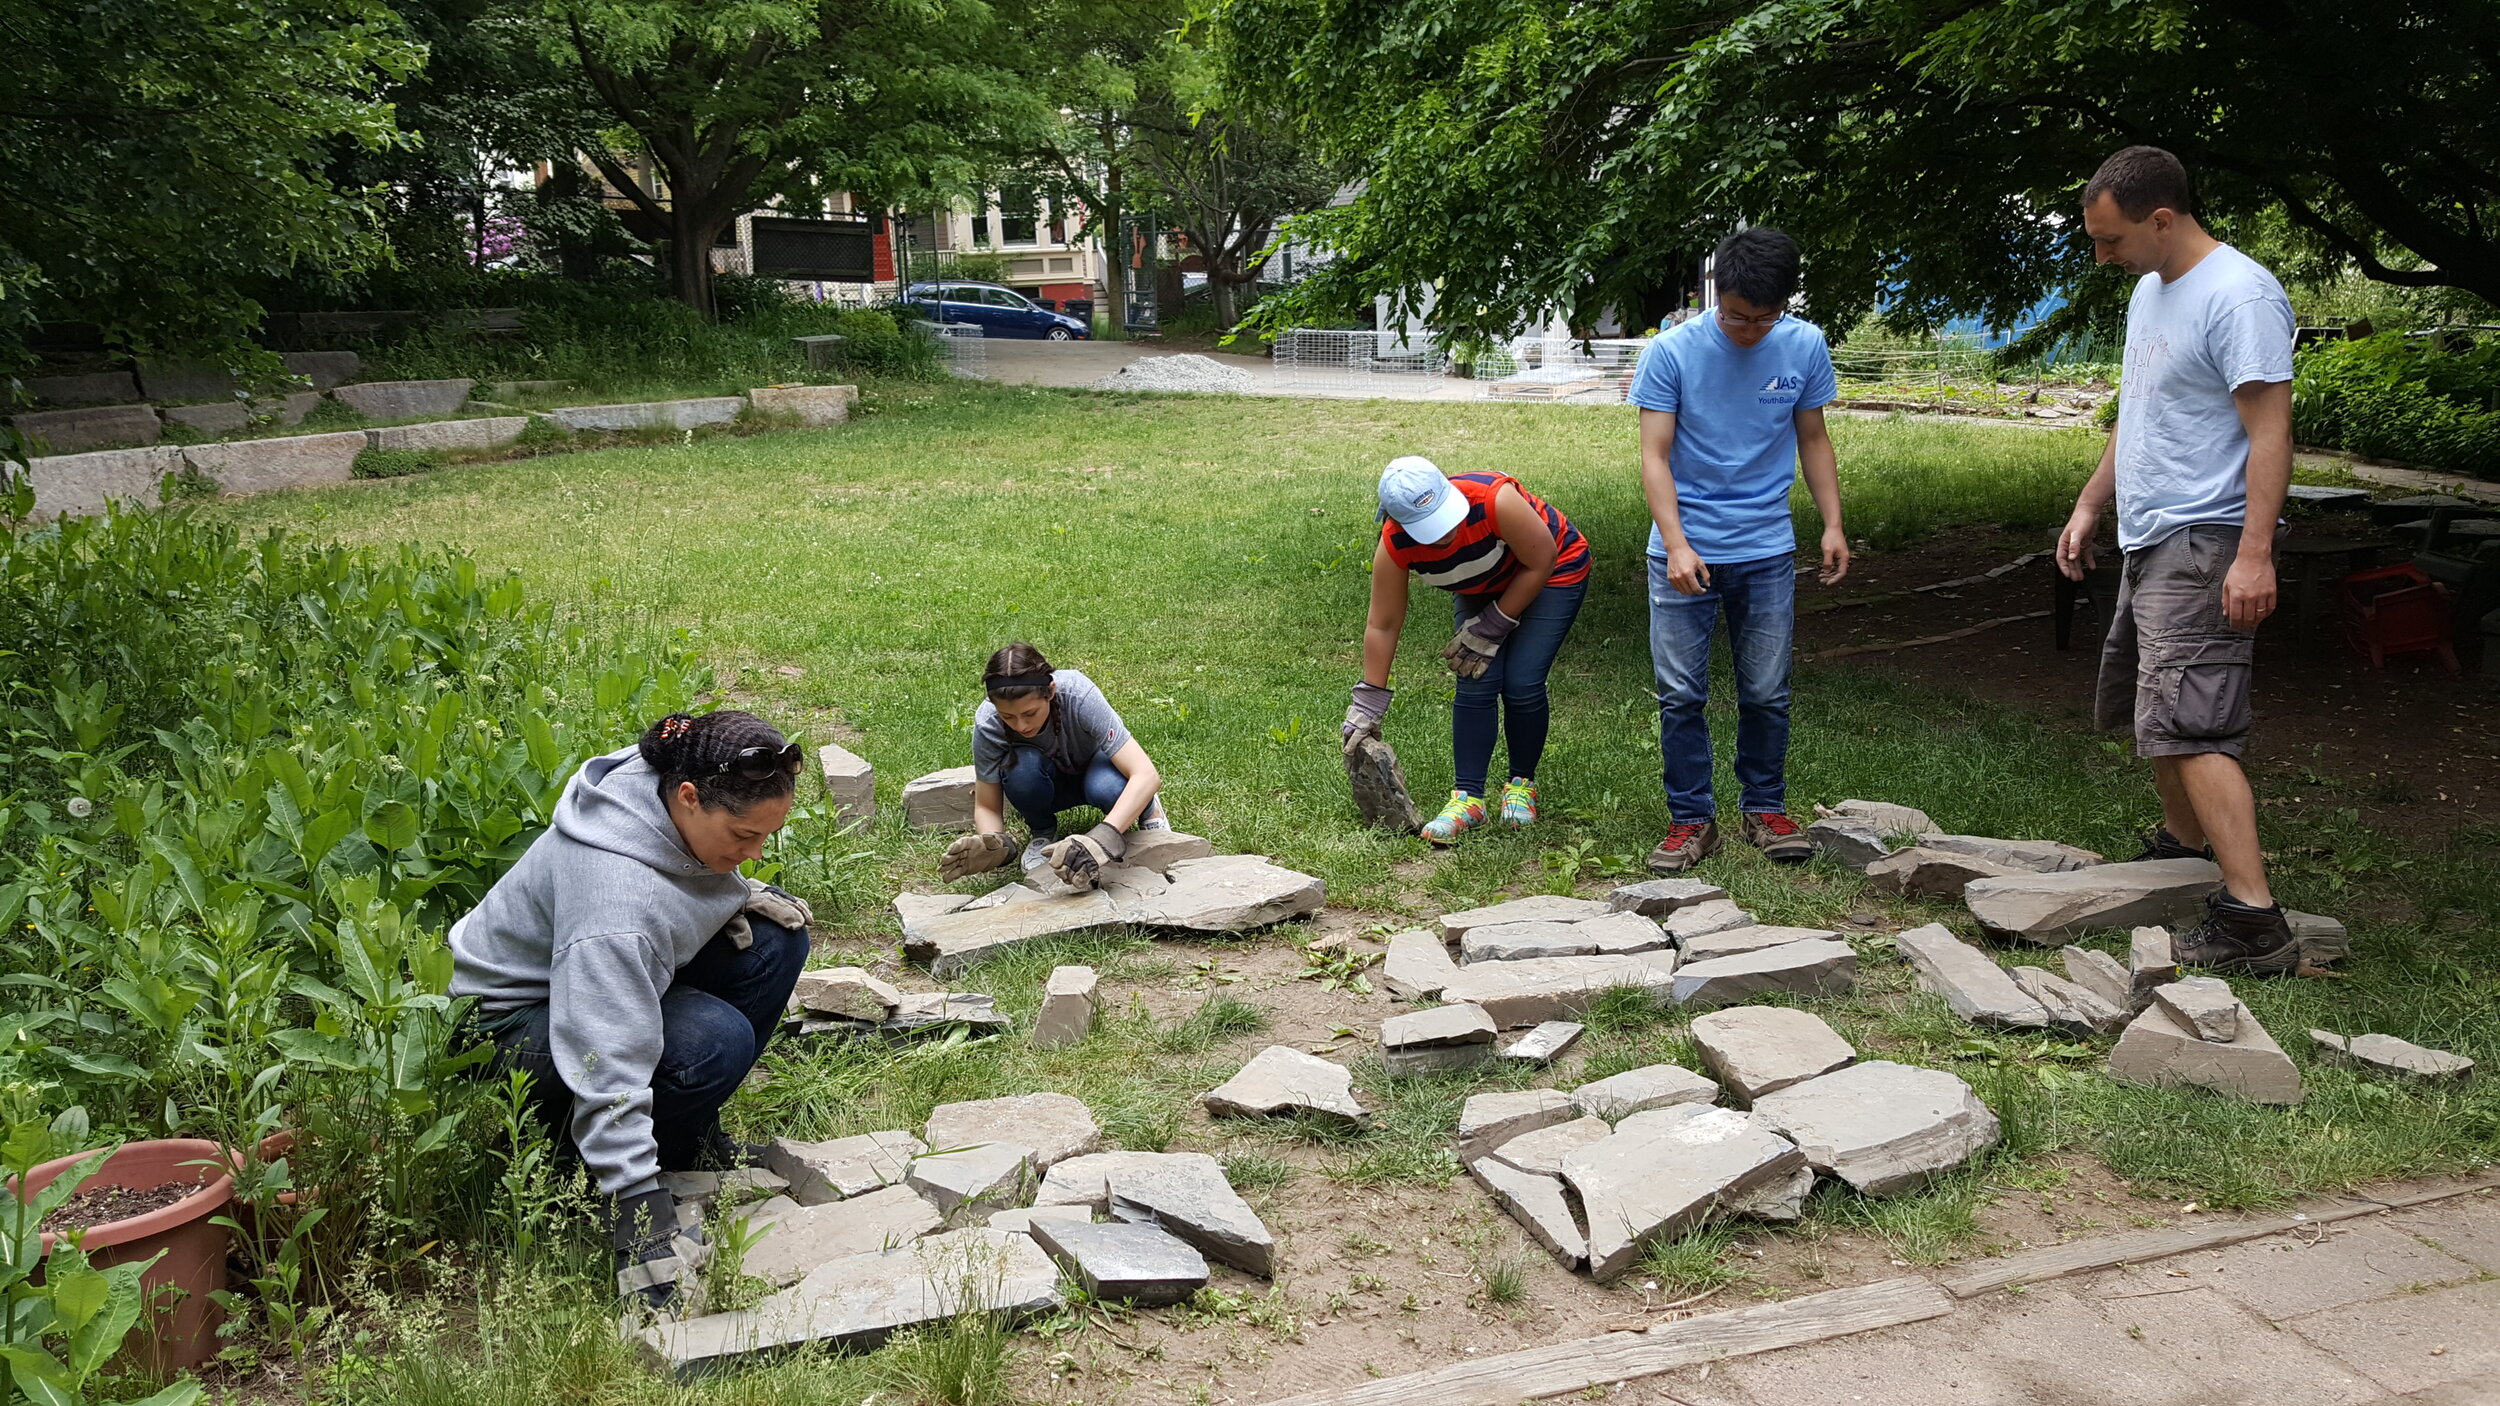 YouthBuild USA volunteers arranging the salvage stones. Picking the nice ones for the face of the wall!